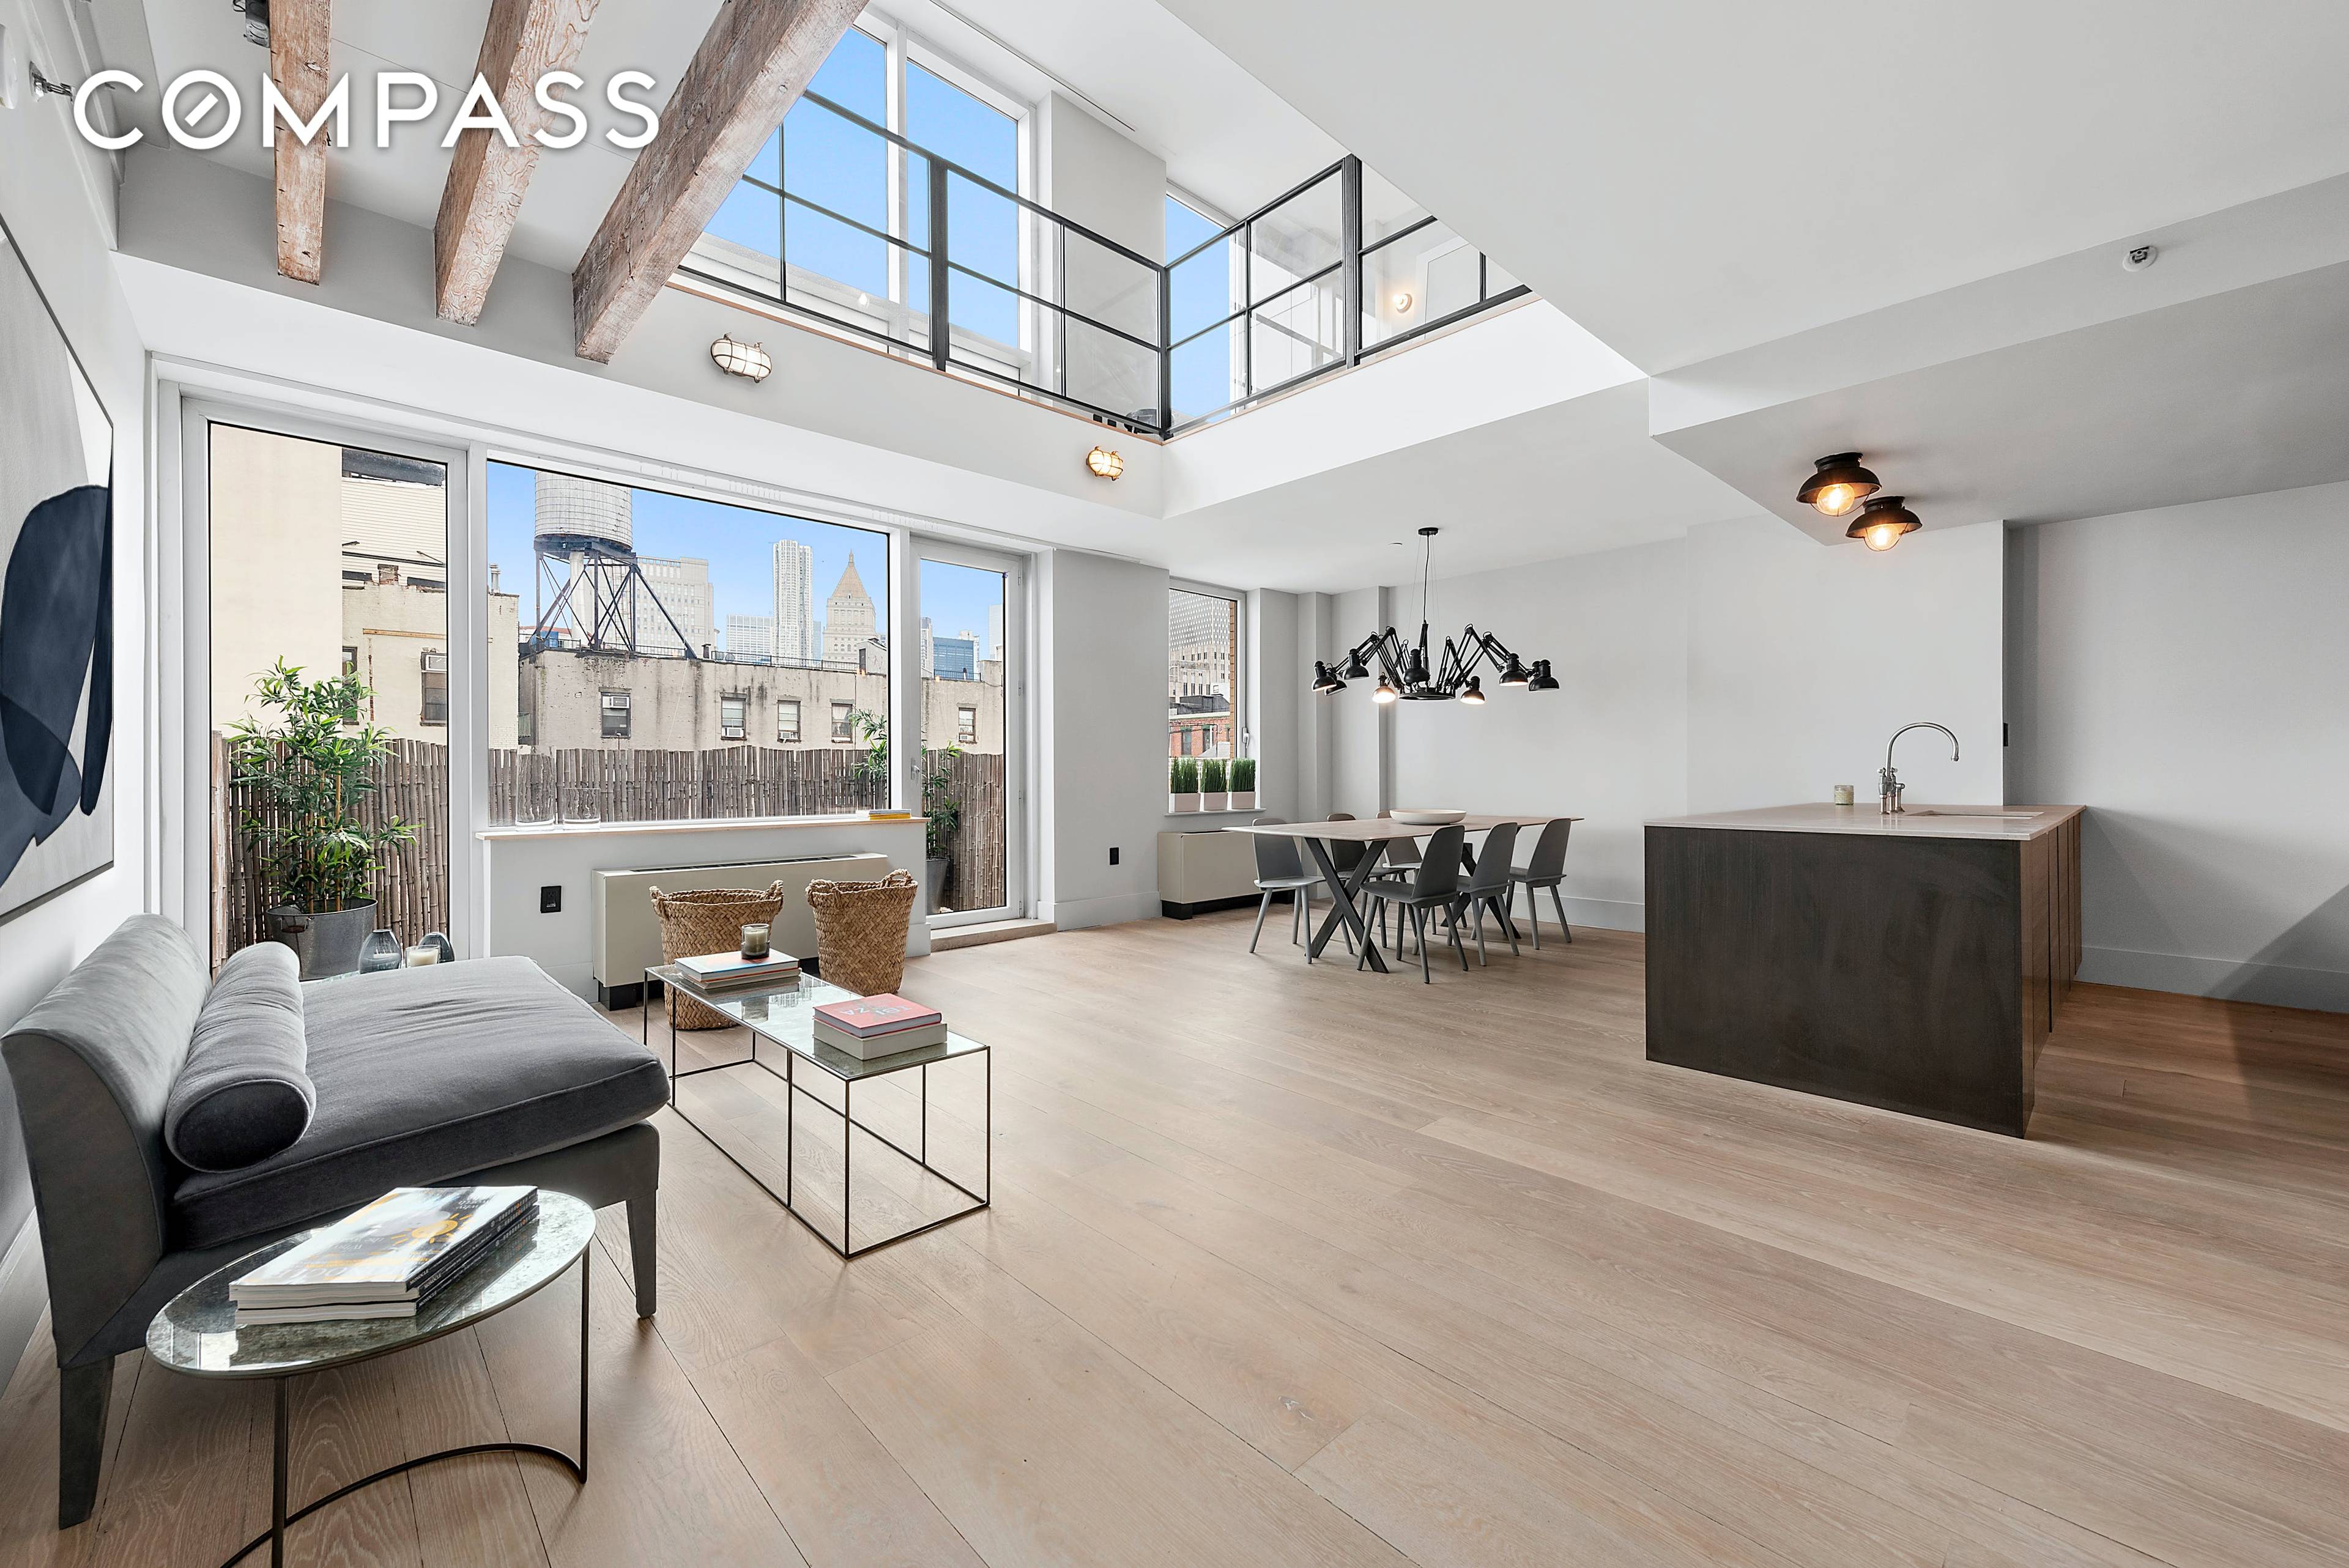 Penthouse F is a renovated 2 Bedroom 2 Bath loft located in the midst of Little Italy, Nolita, Soho and Chinatown.